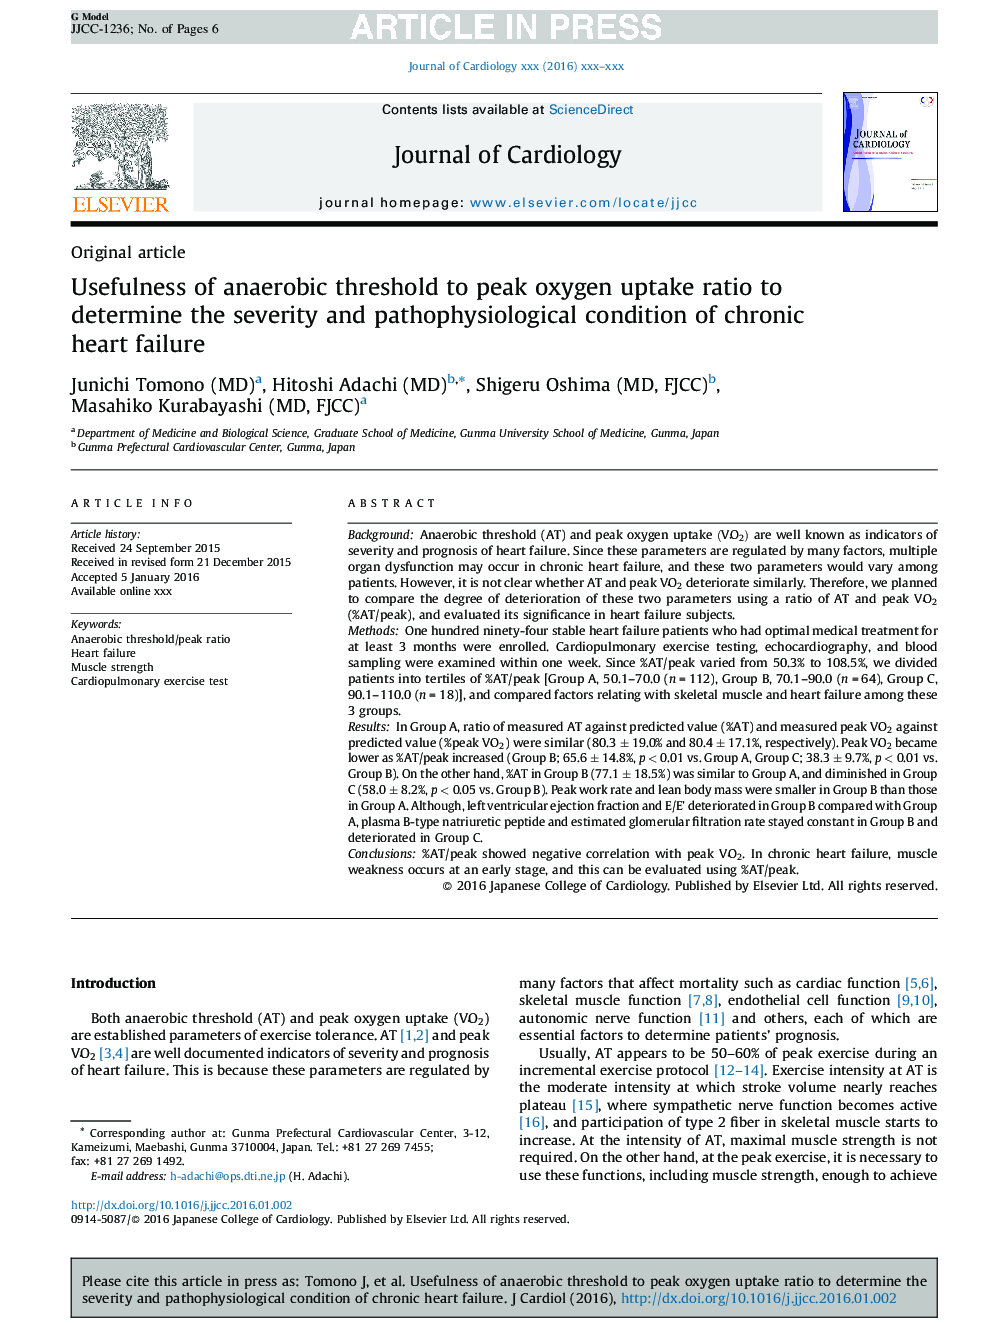 Usefulness of anaerobic threshold to peak oxygen uptake ratio to determine the severity and pathophysiological condition of chronic heart failure